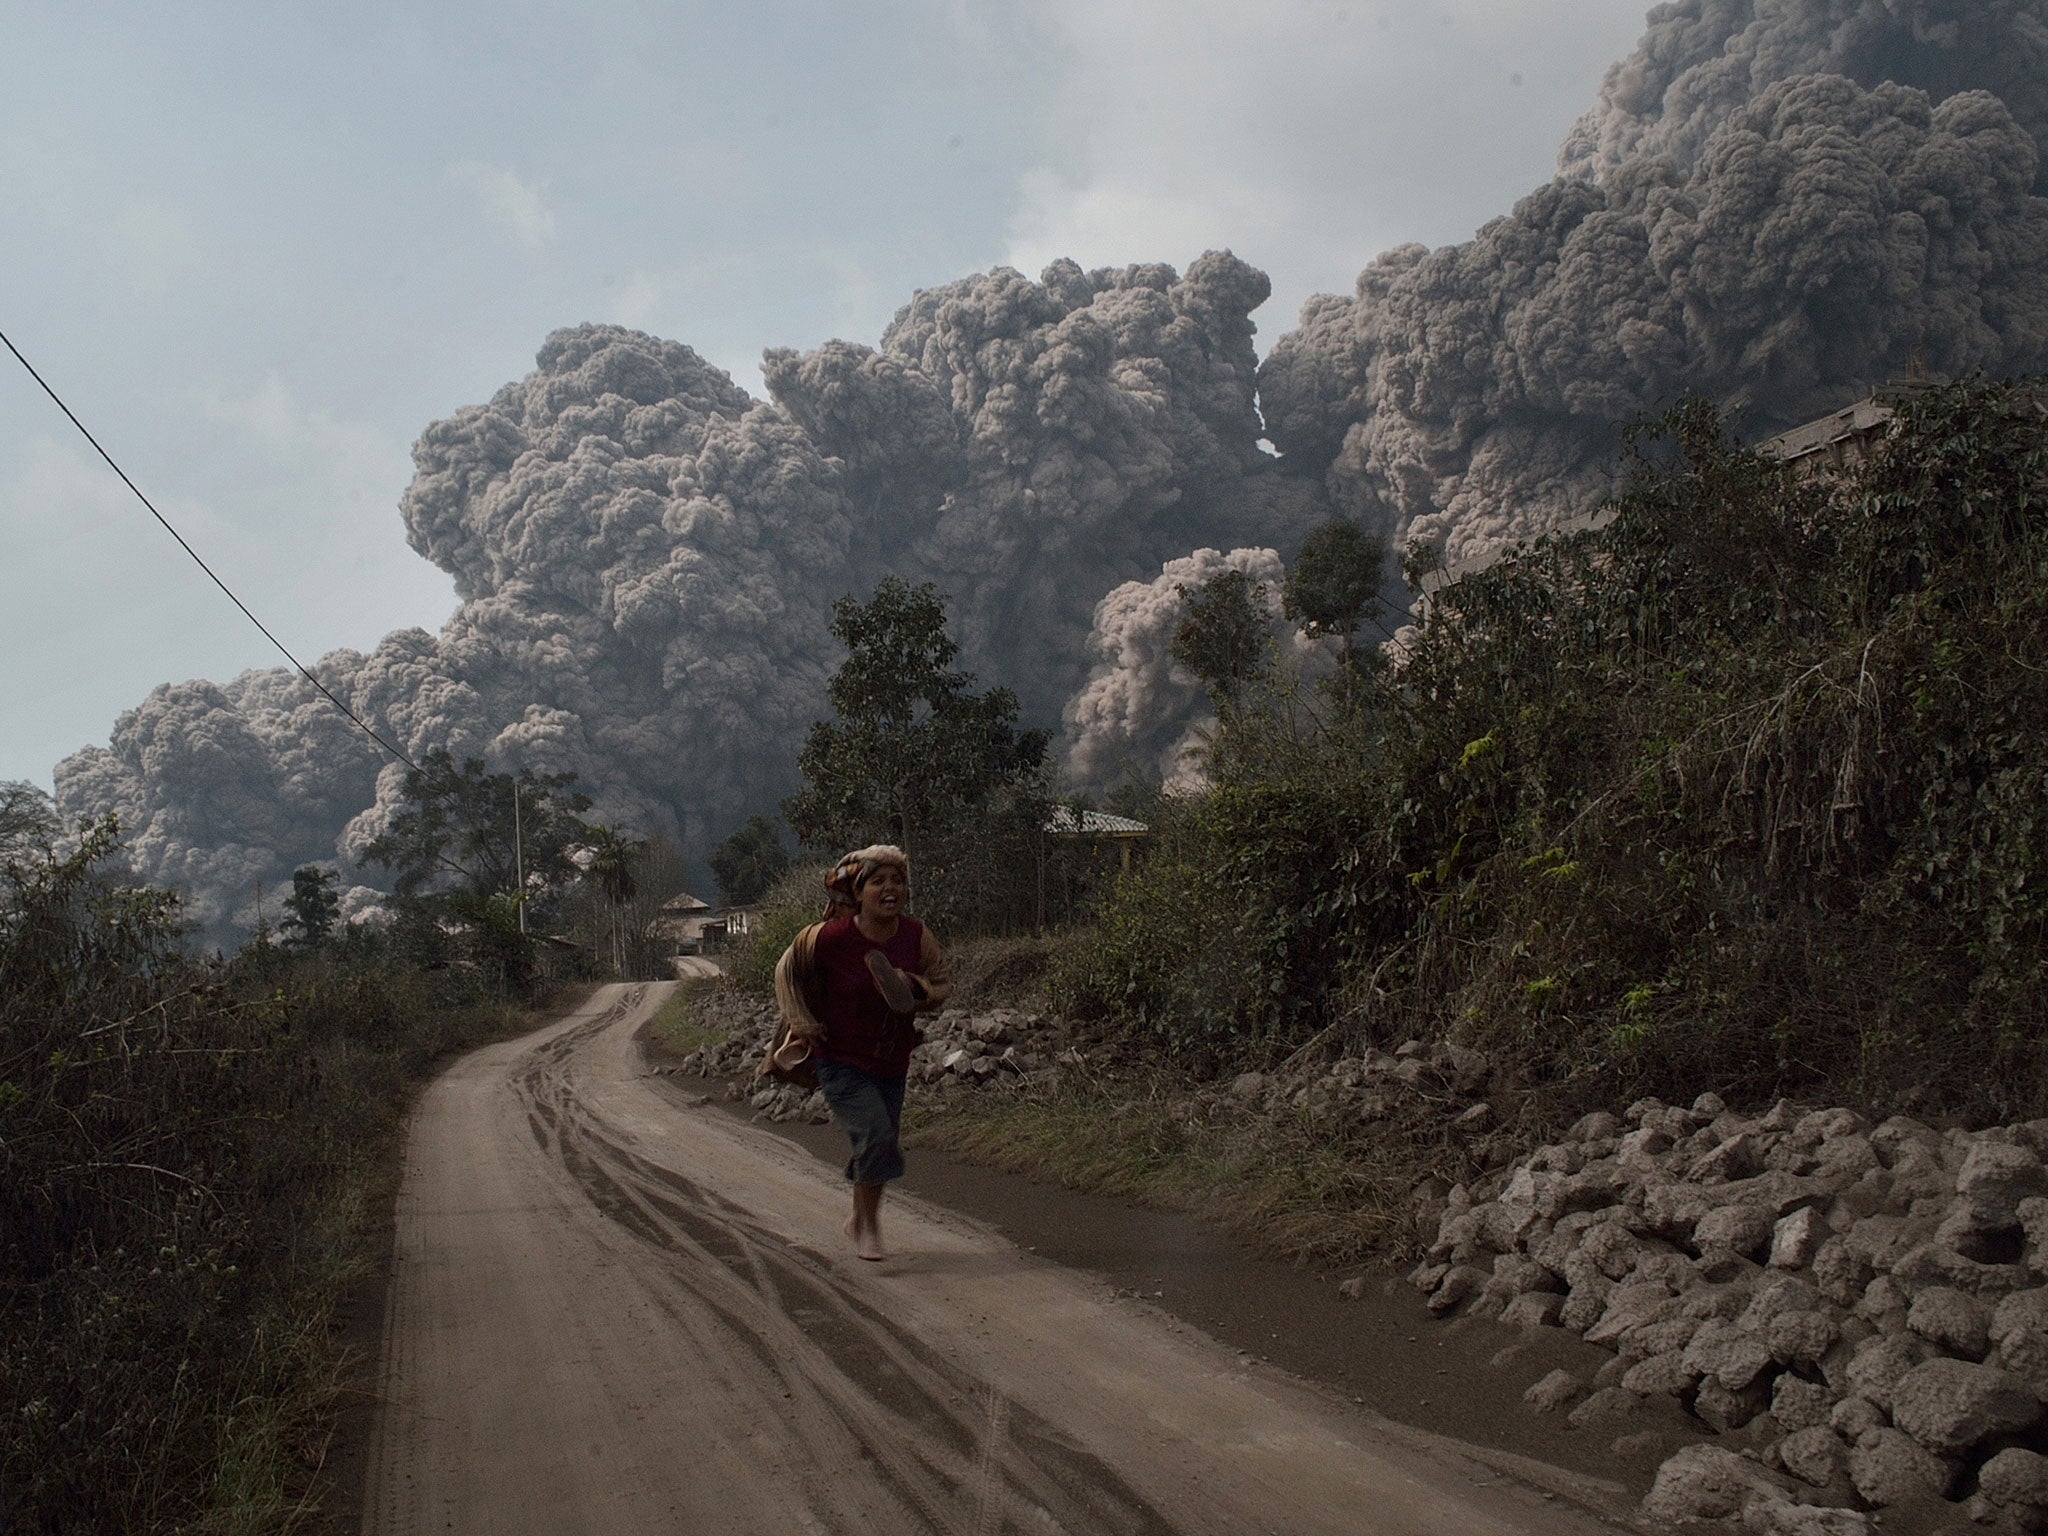 A resident runs away to escape from hot volcanic ash clouds engulfing villages in Karo district during the eruption in Sumatra.